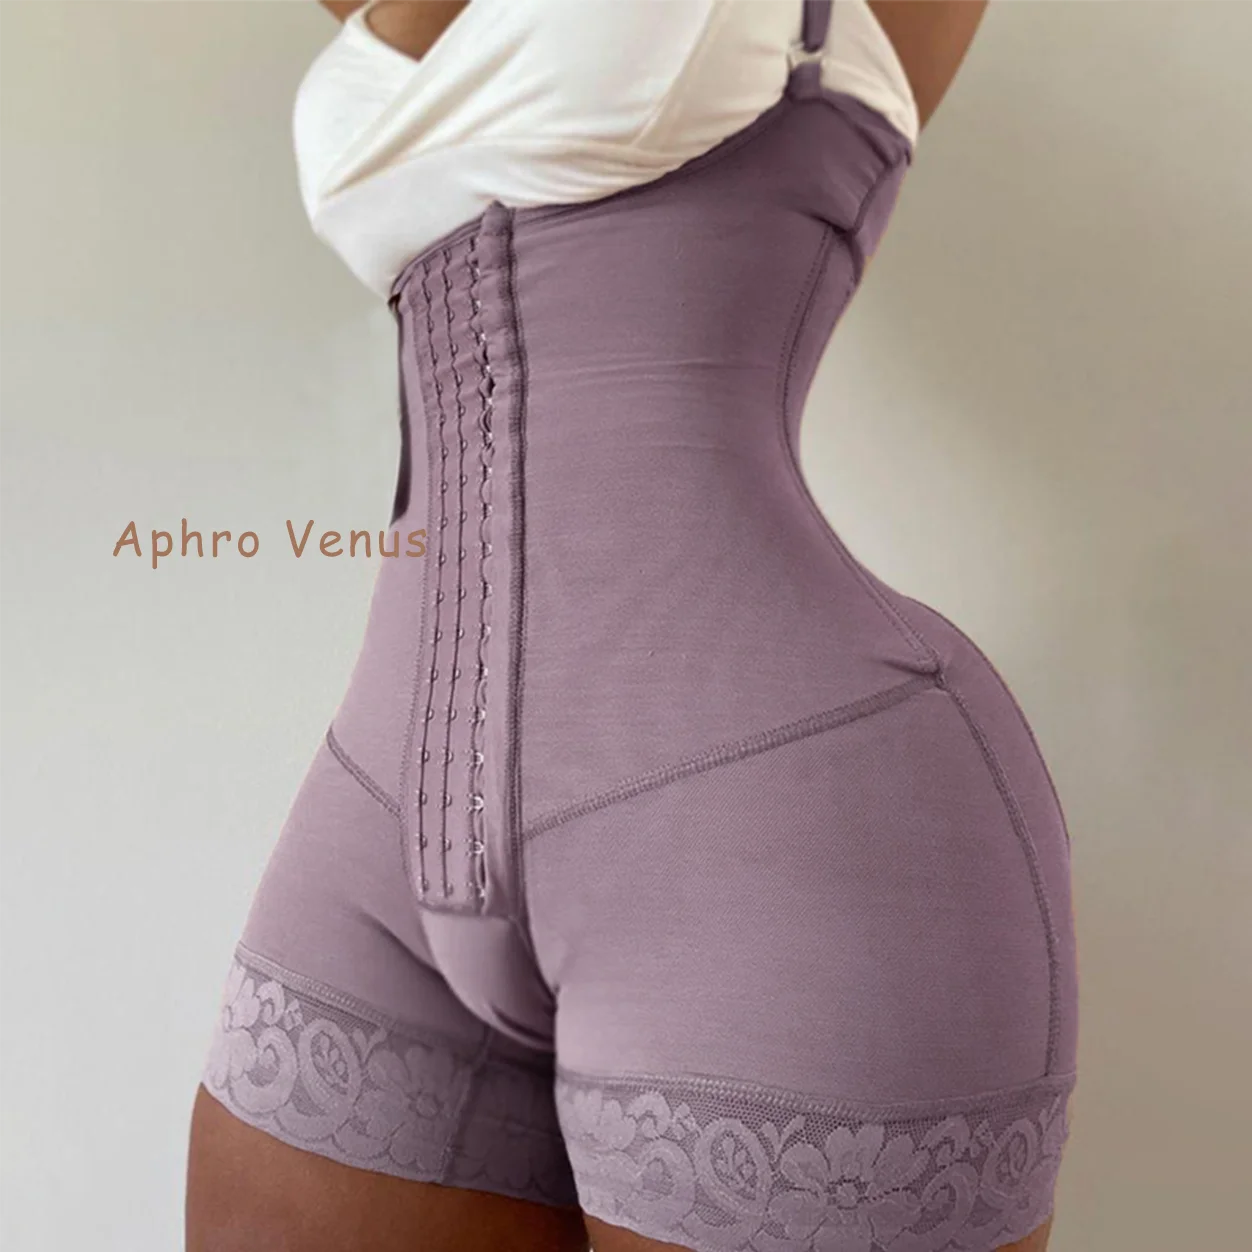 Fajas Colombianas High Compression Full Body Hourglass Girdle Waist Trainer  Butt Lifter Post-operative Shorts Women's Shapewear